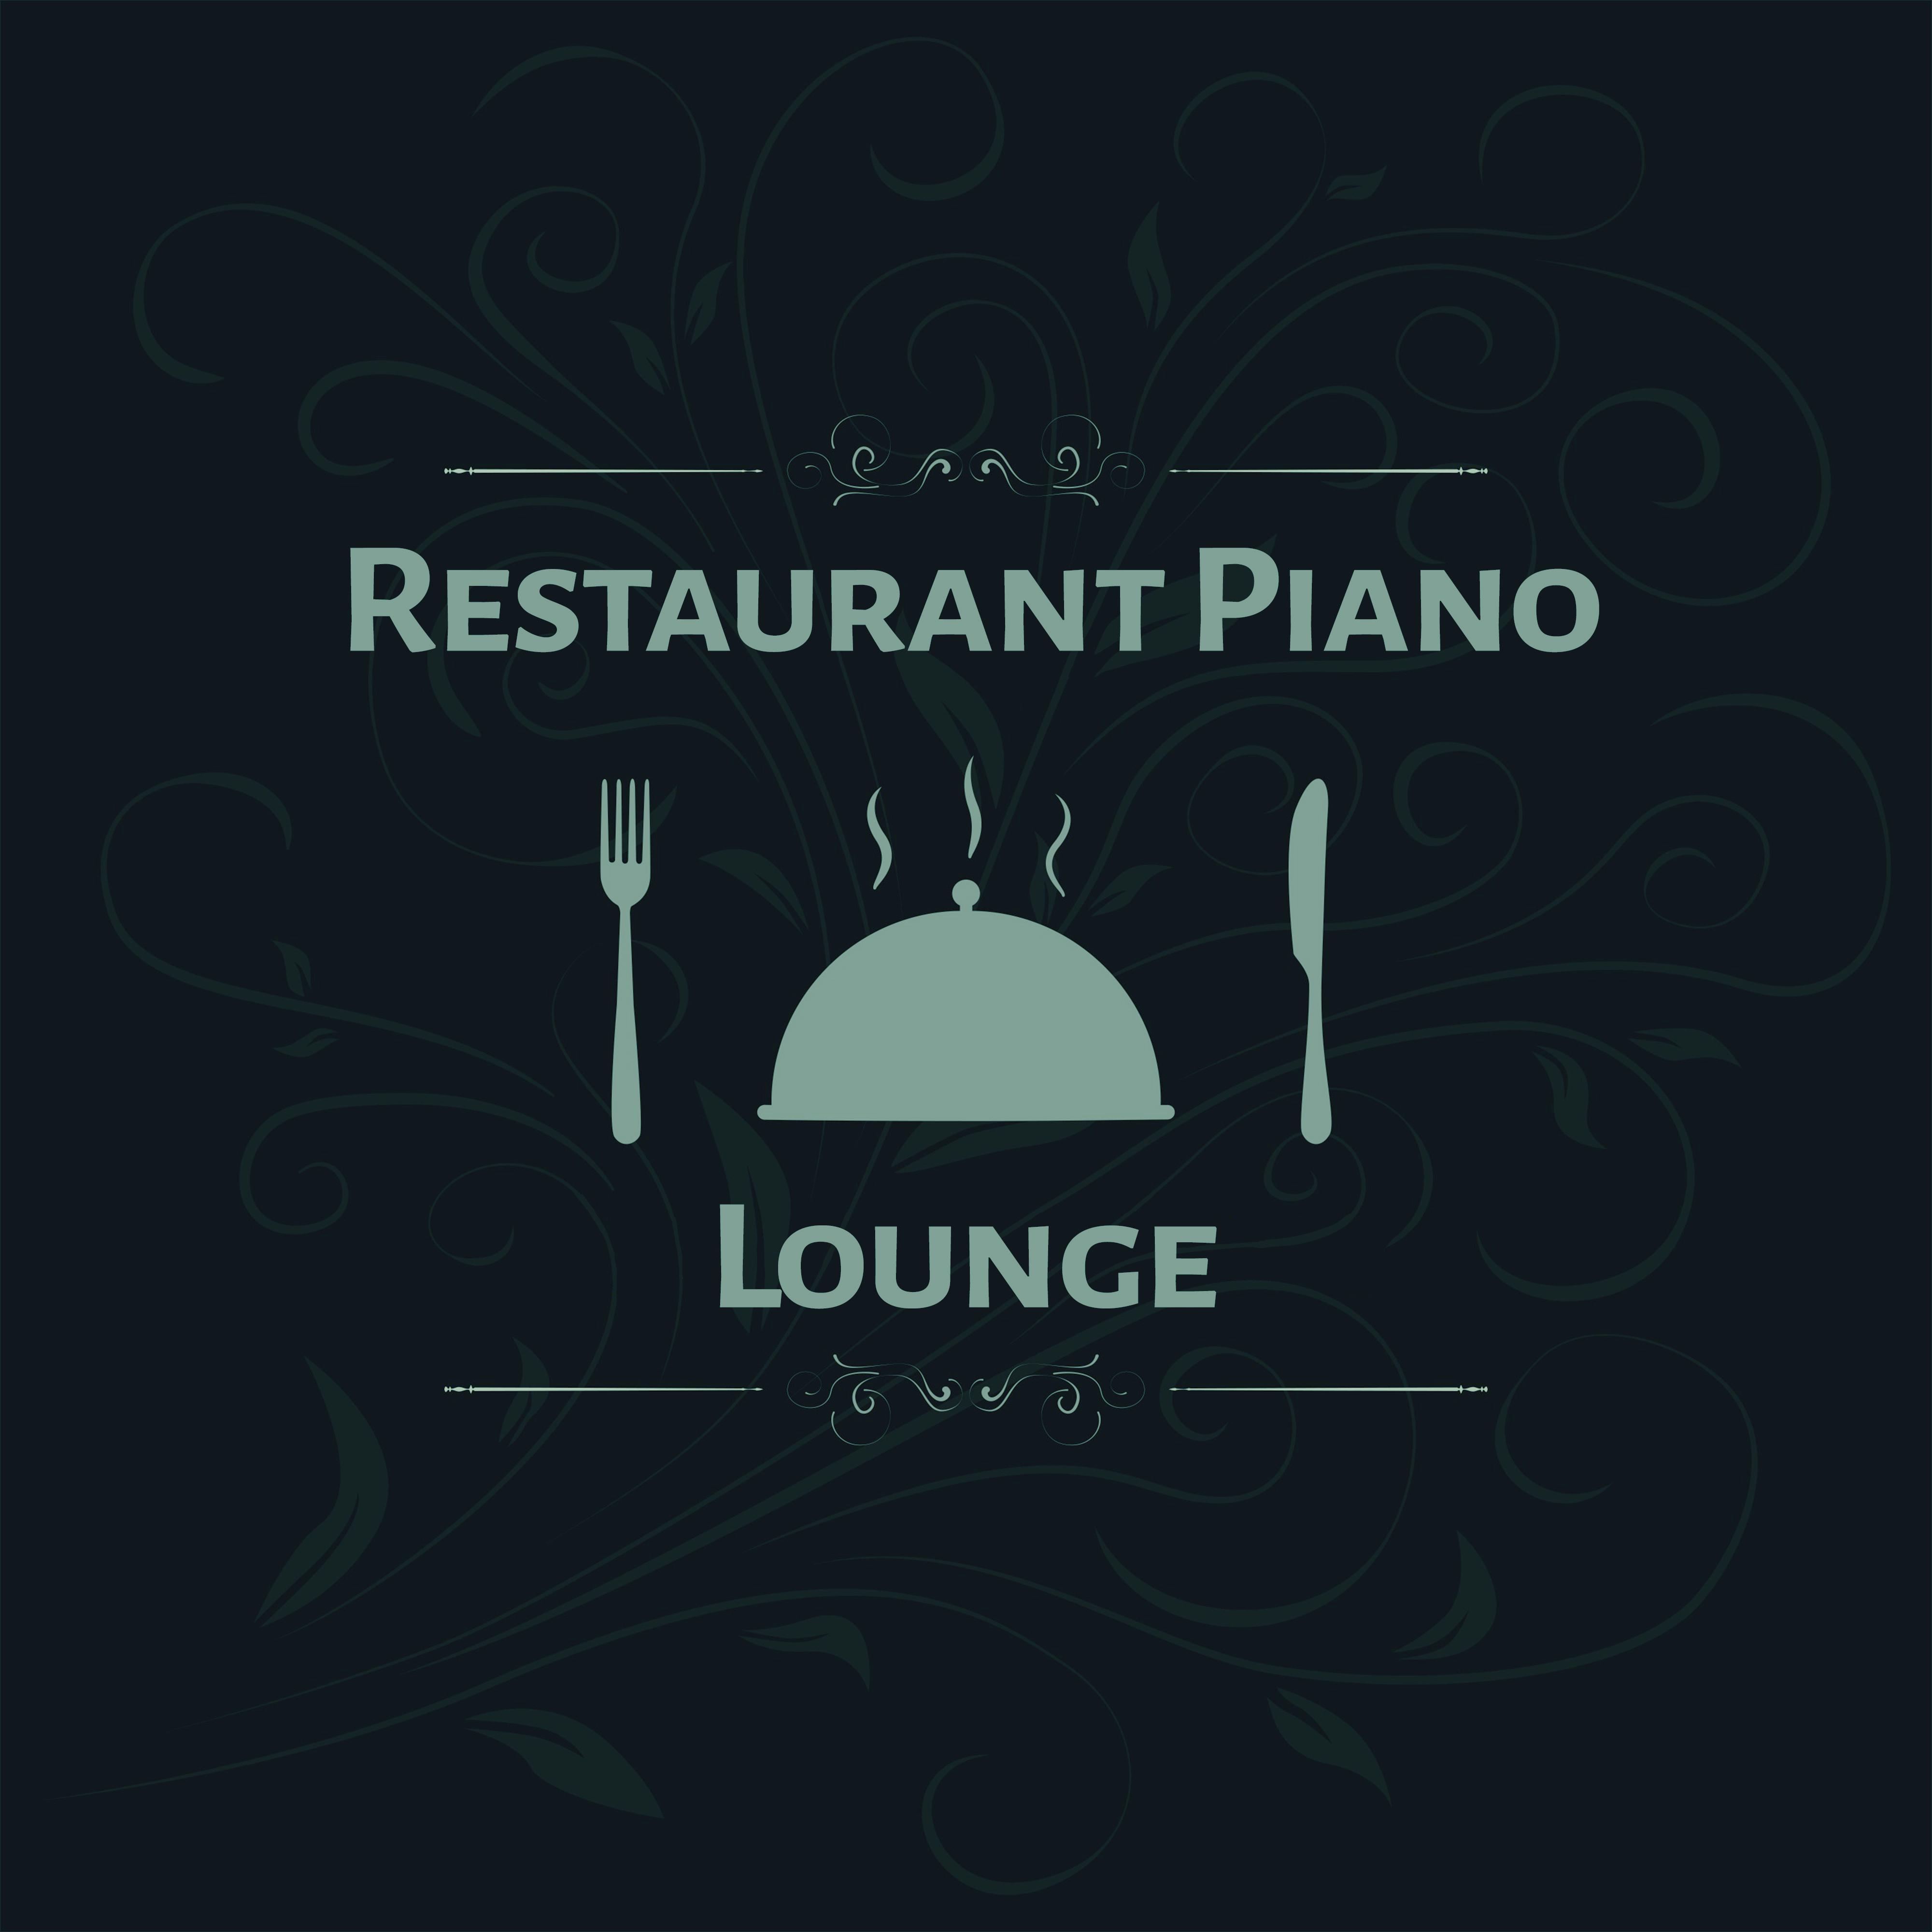 Restaurant Piano Lounge  Soothing Sounds of Jazz, Piano Instrumental, Smooth Jazz, Background Music for Restaurant  Cafe